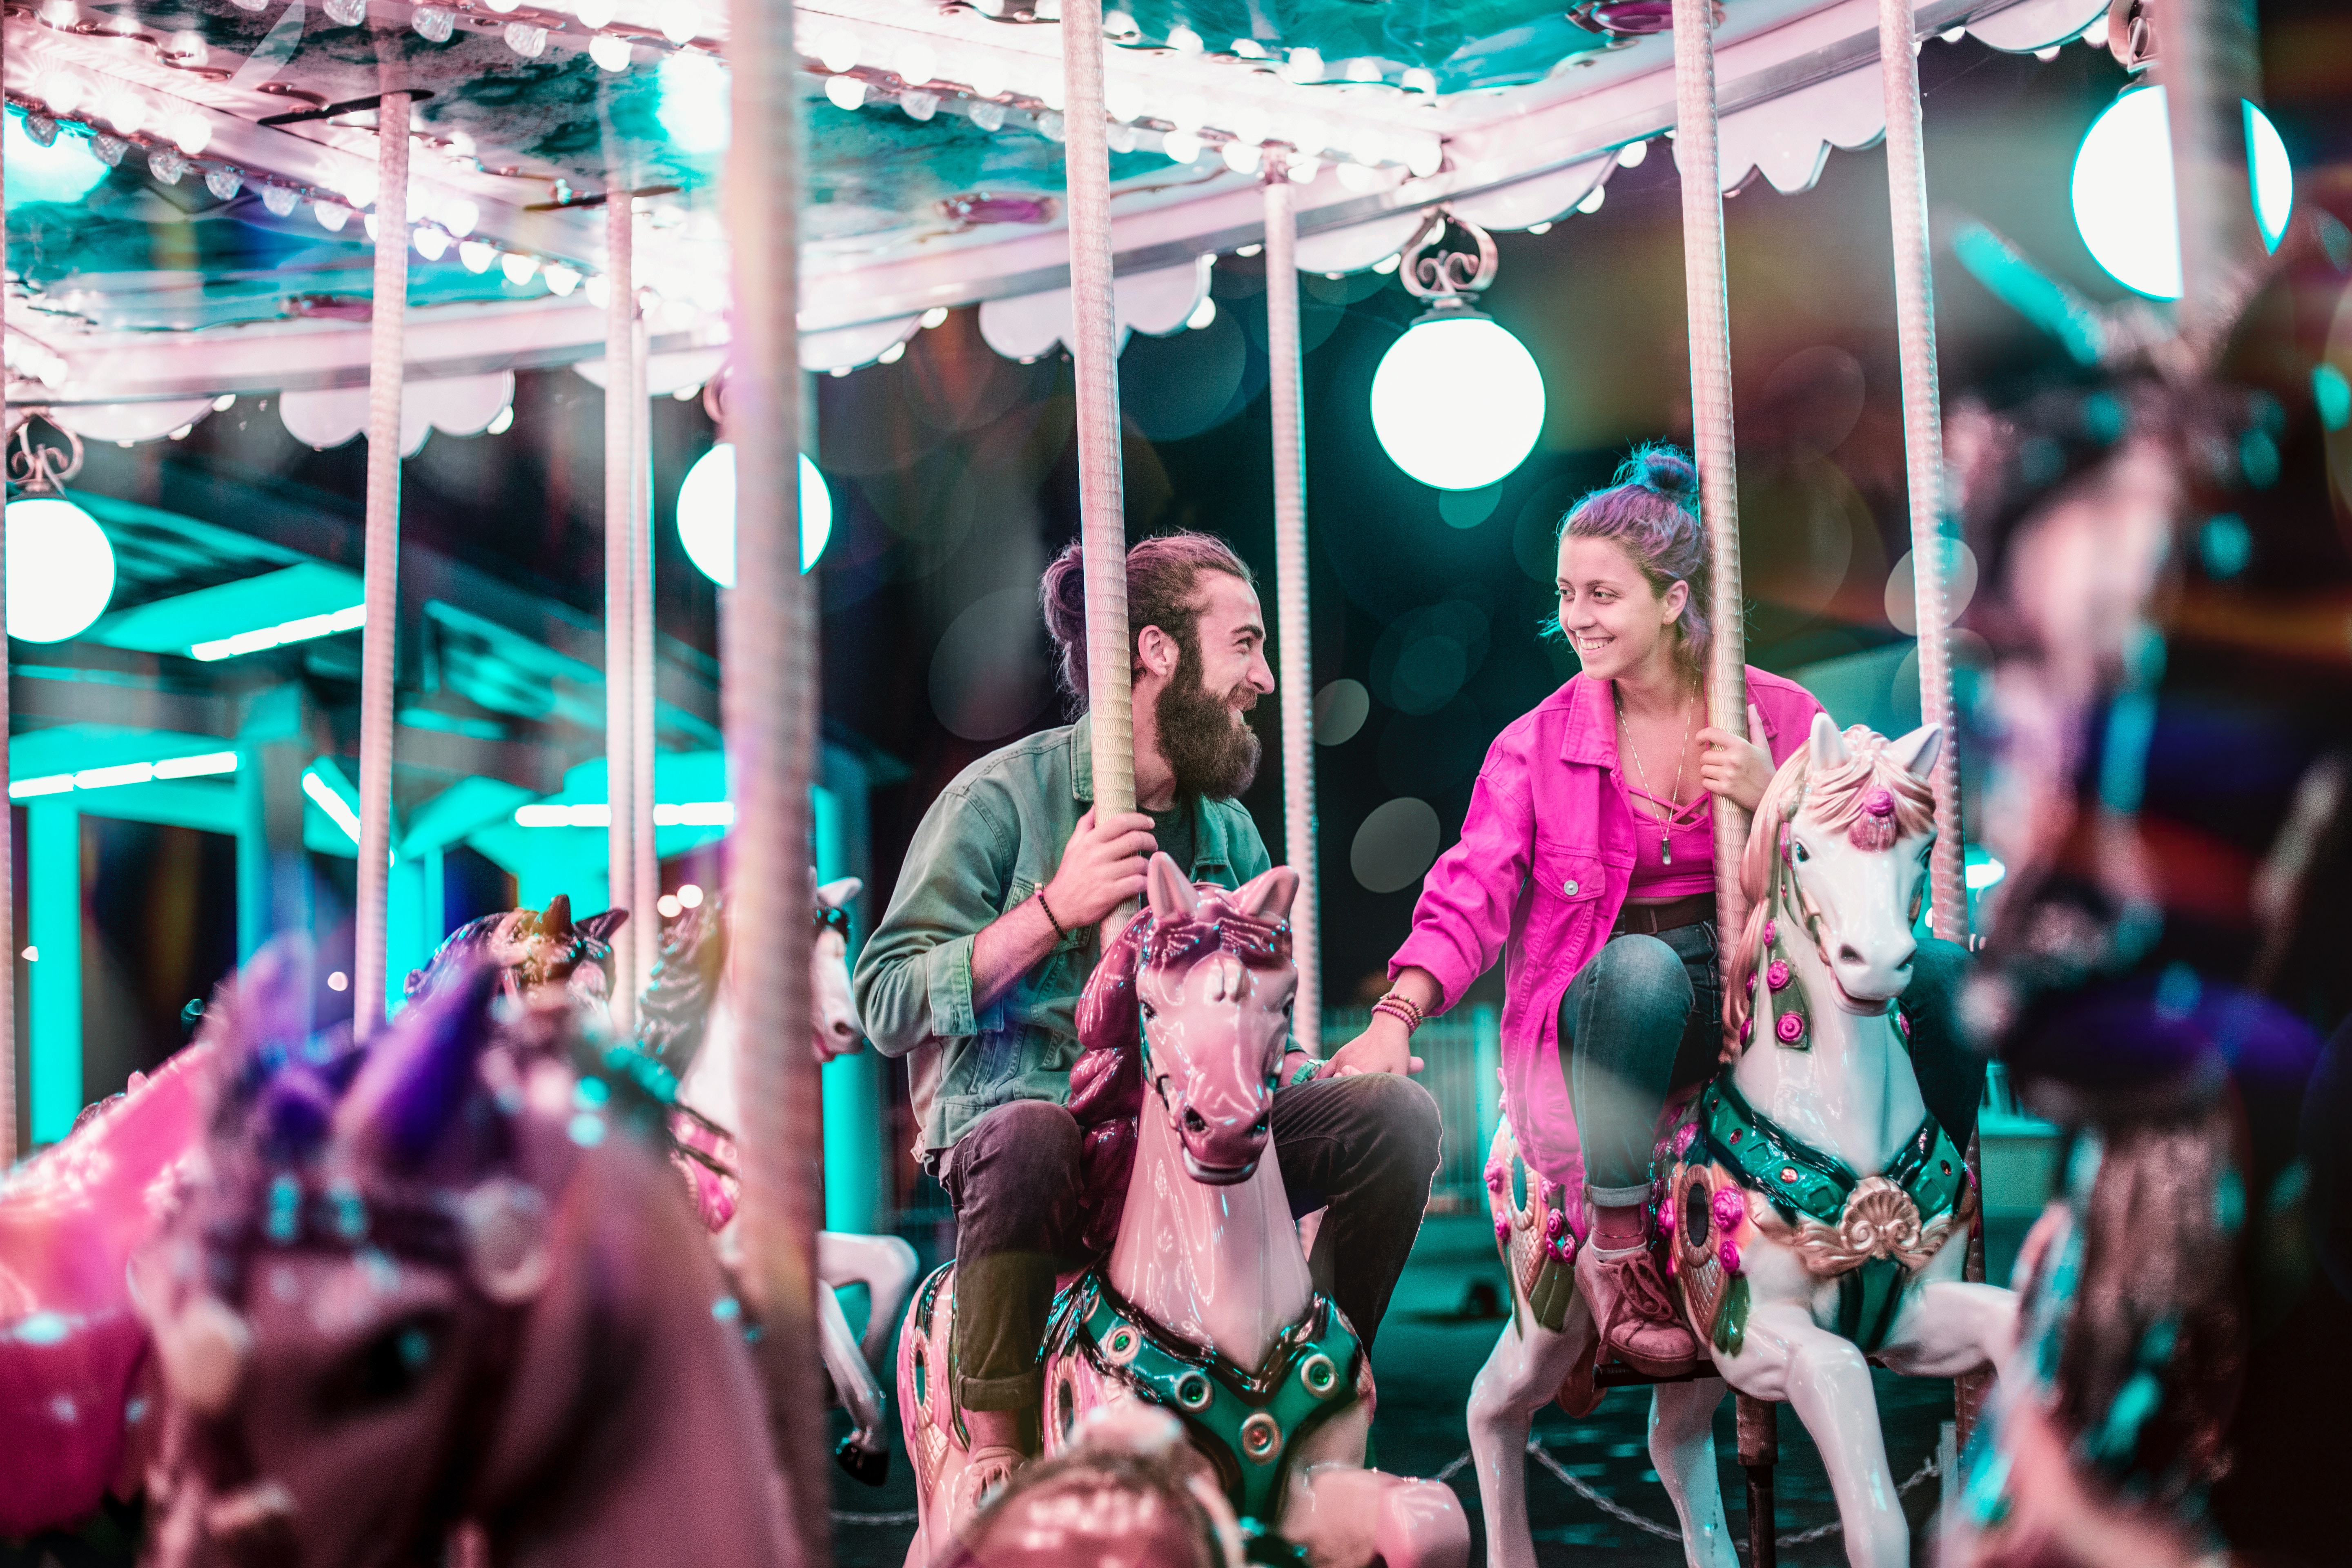 A couple on a carousel. | Source: Pexels